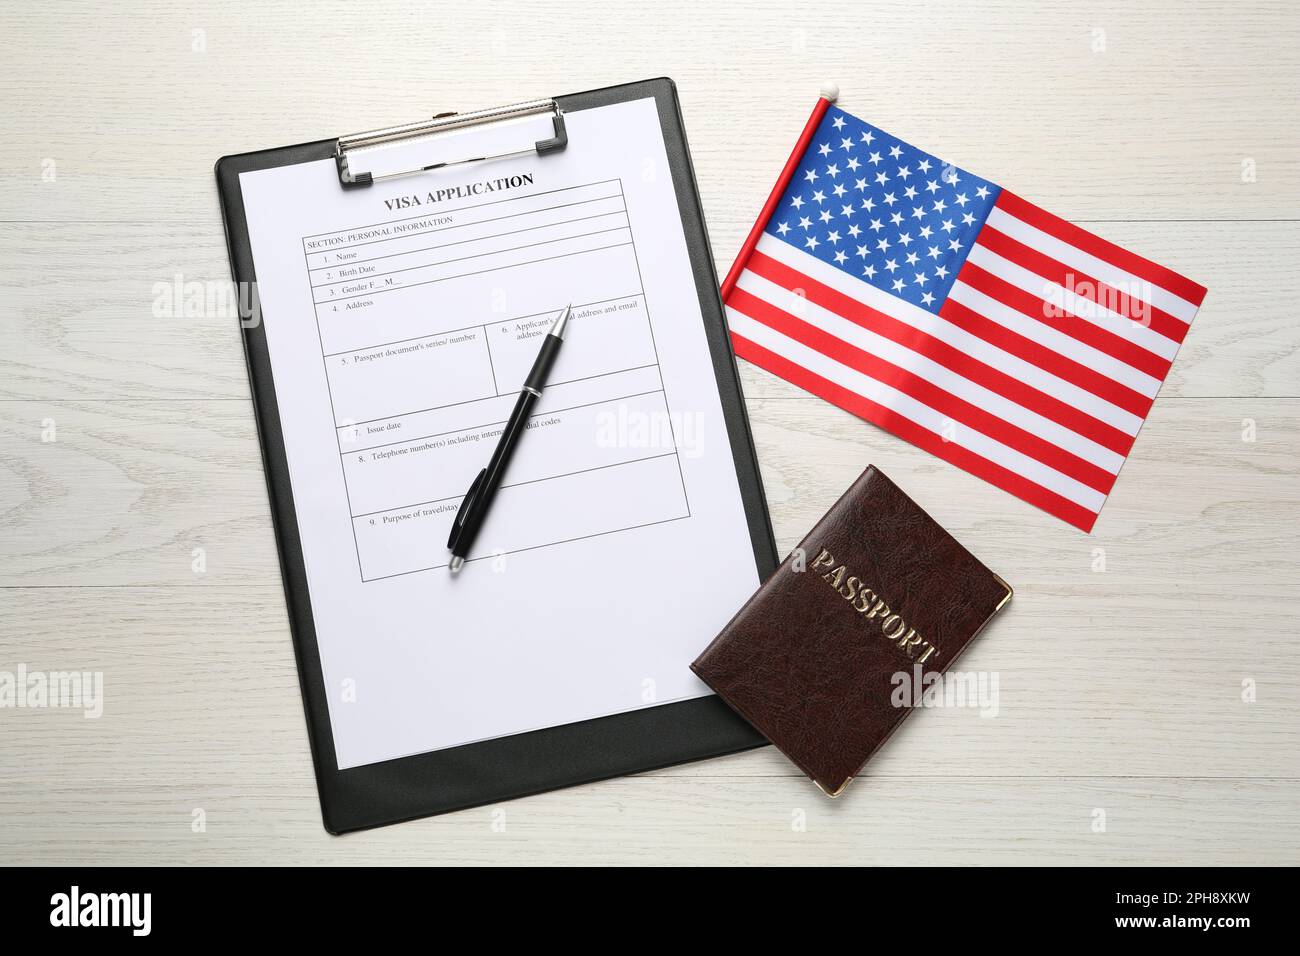 American flag, visa application form and passport on white wooden table, flat lay Stock Photo